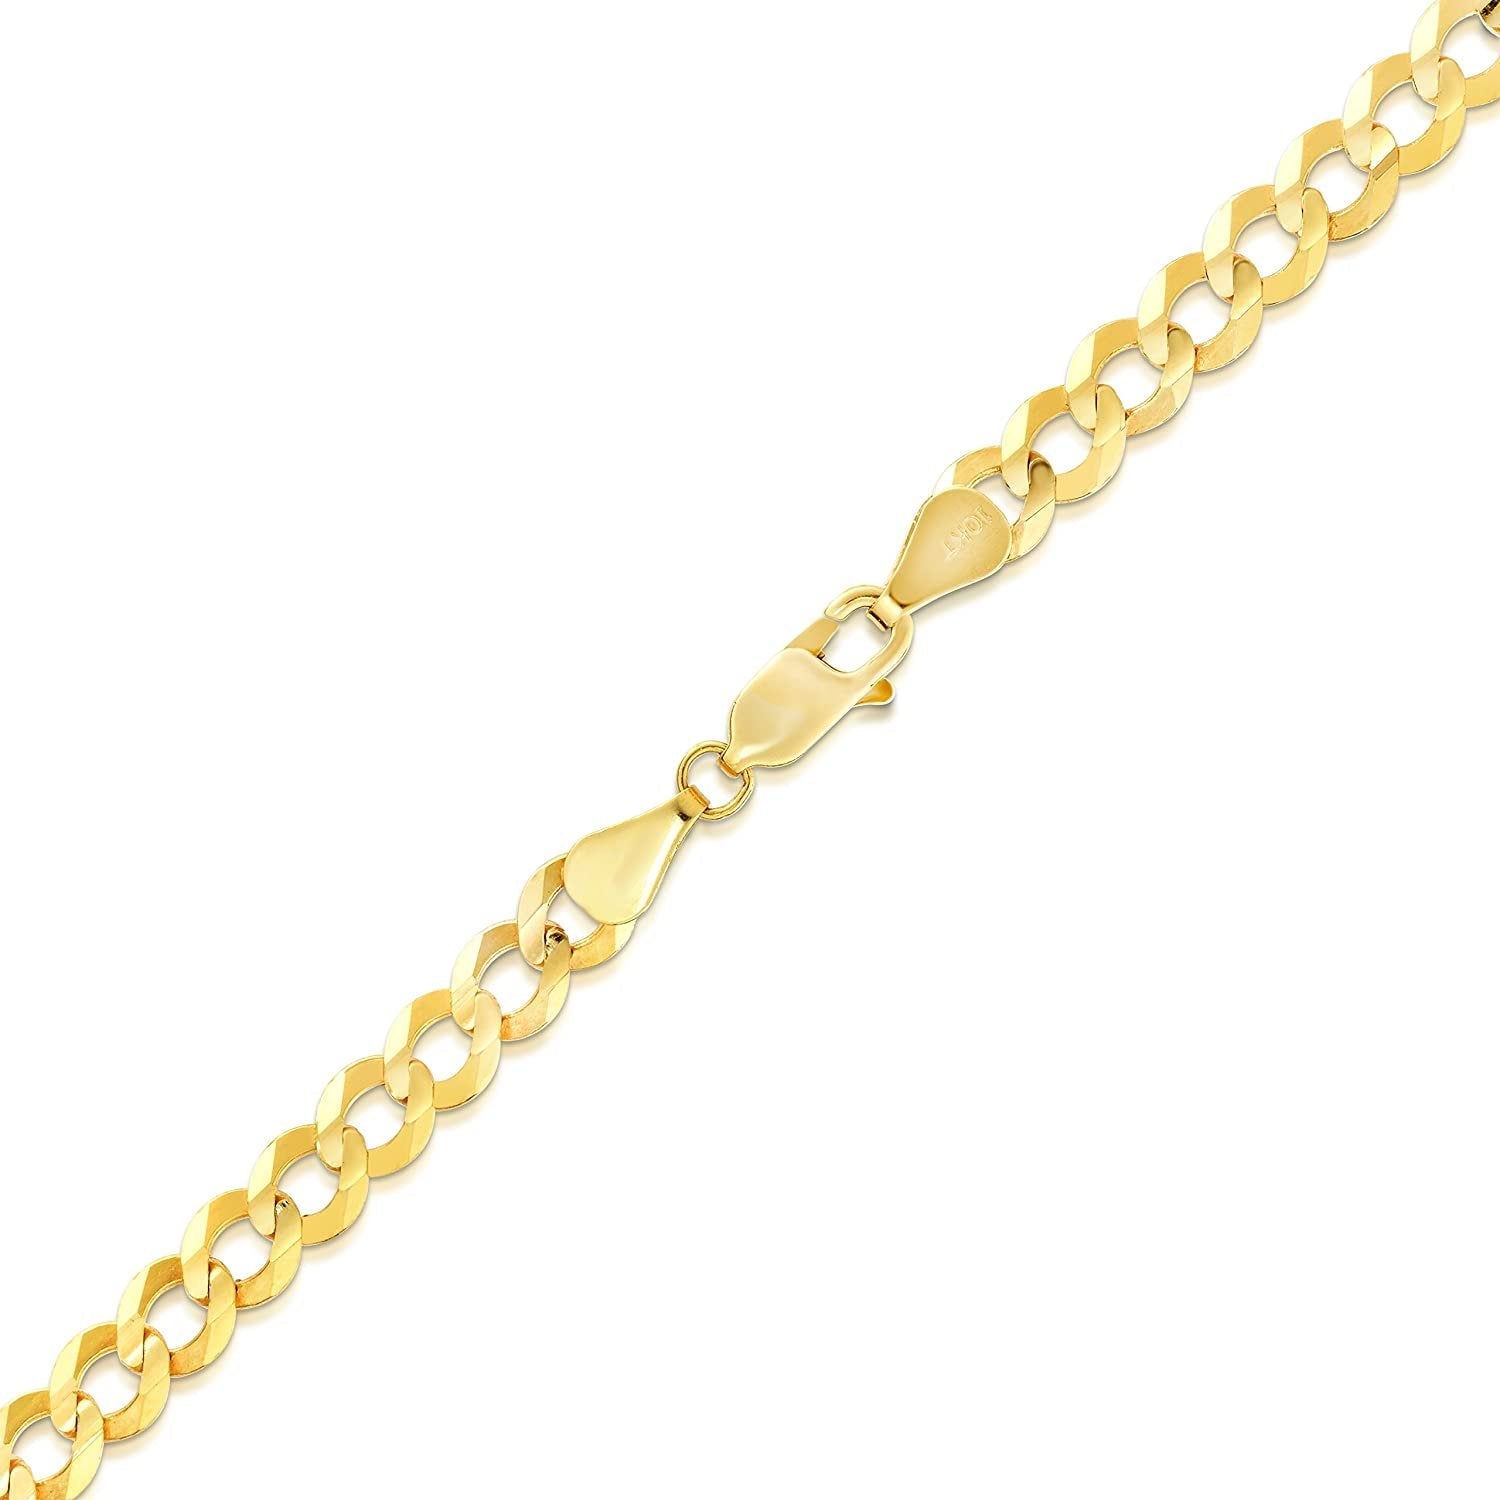 Floreo 10k Yellow Gold 5mm Mens Solid Curb Cuban Link Chain Necklace